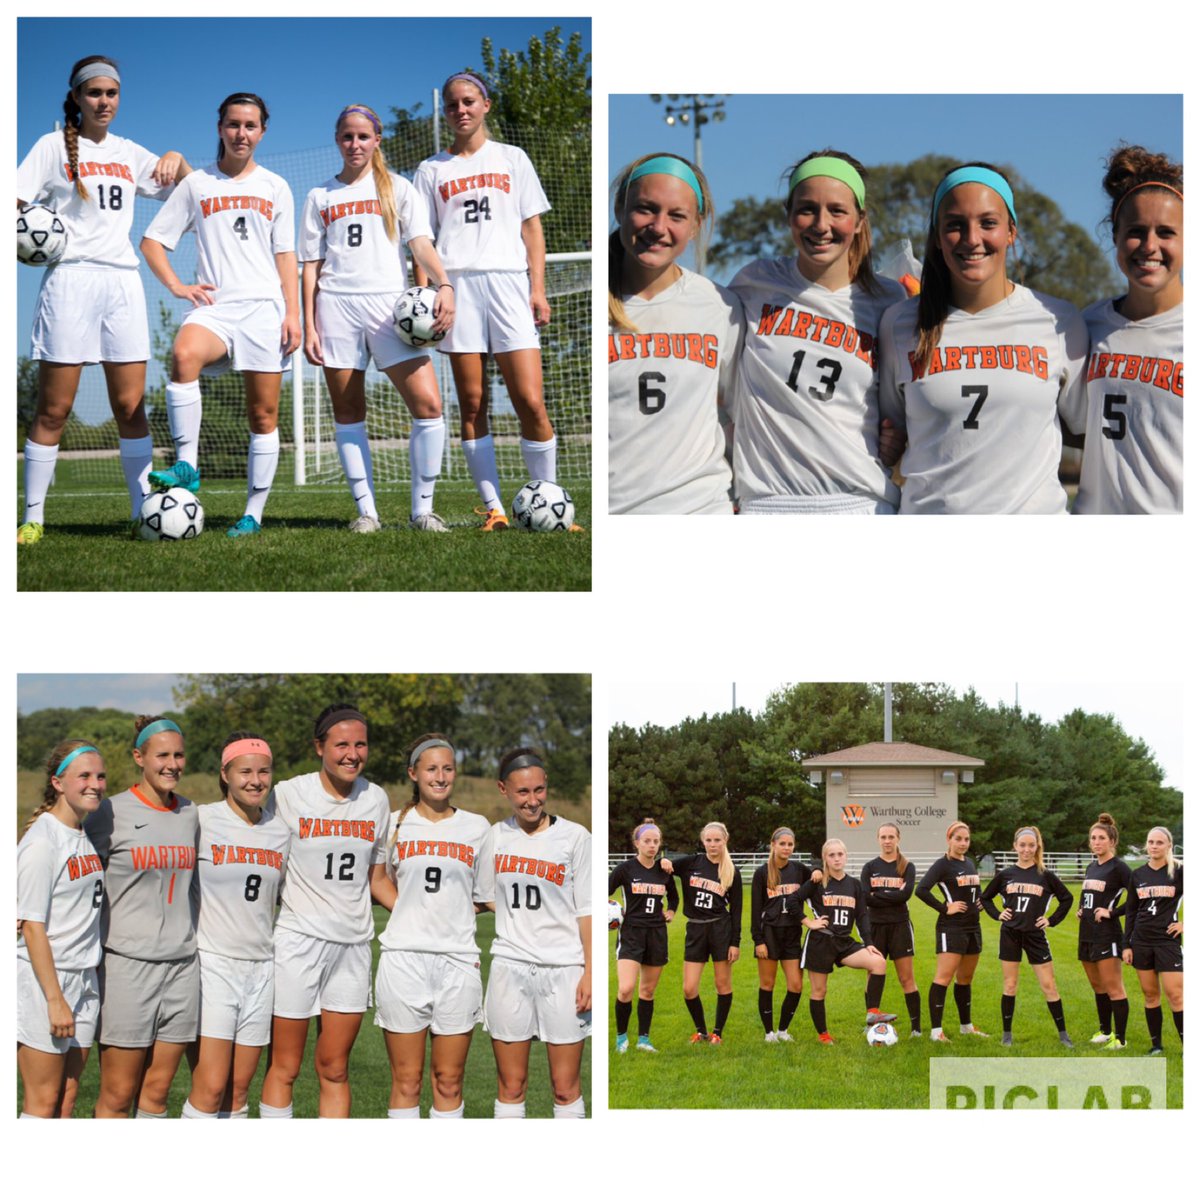 “There is no limit to what we, as women can accomplish.” -Michelle Obama.                                     Thankful for these women who have taught me just that!               #formerplayers #ilikewartburgsoccer #internationalwomensday